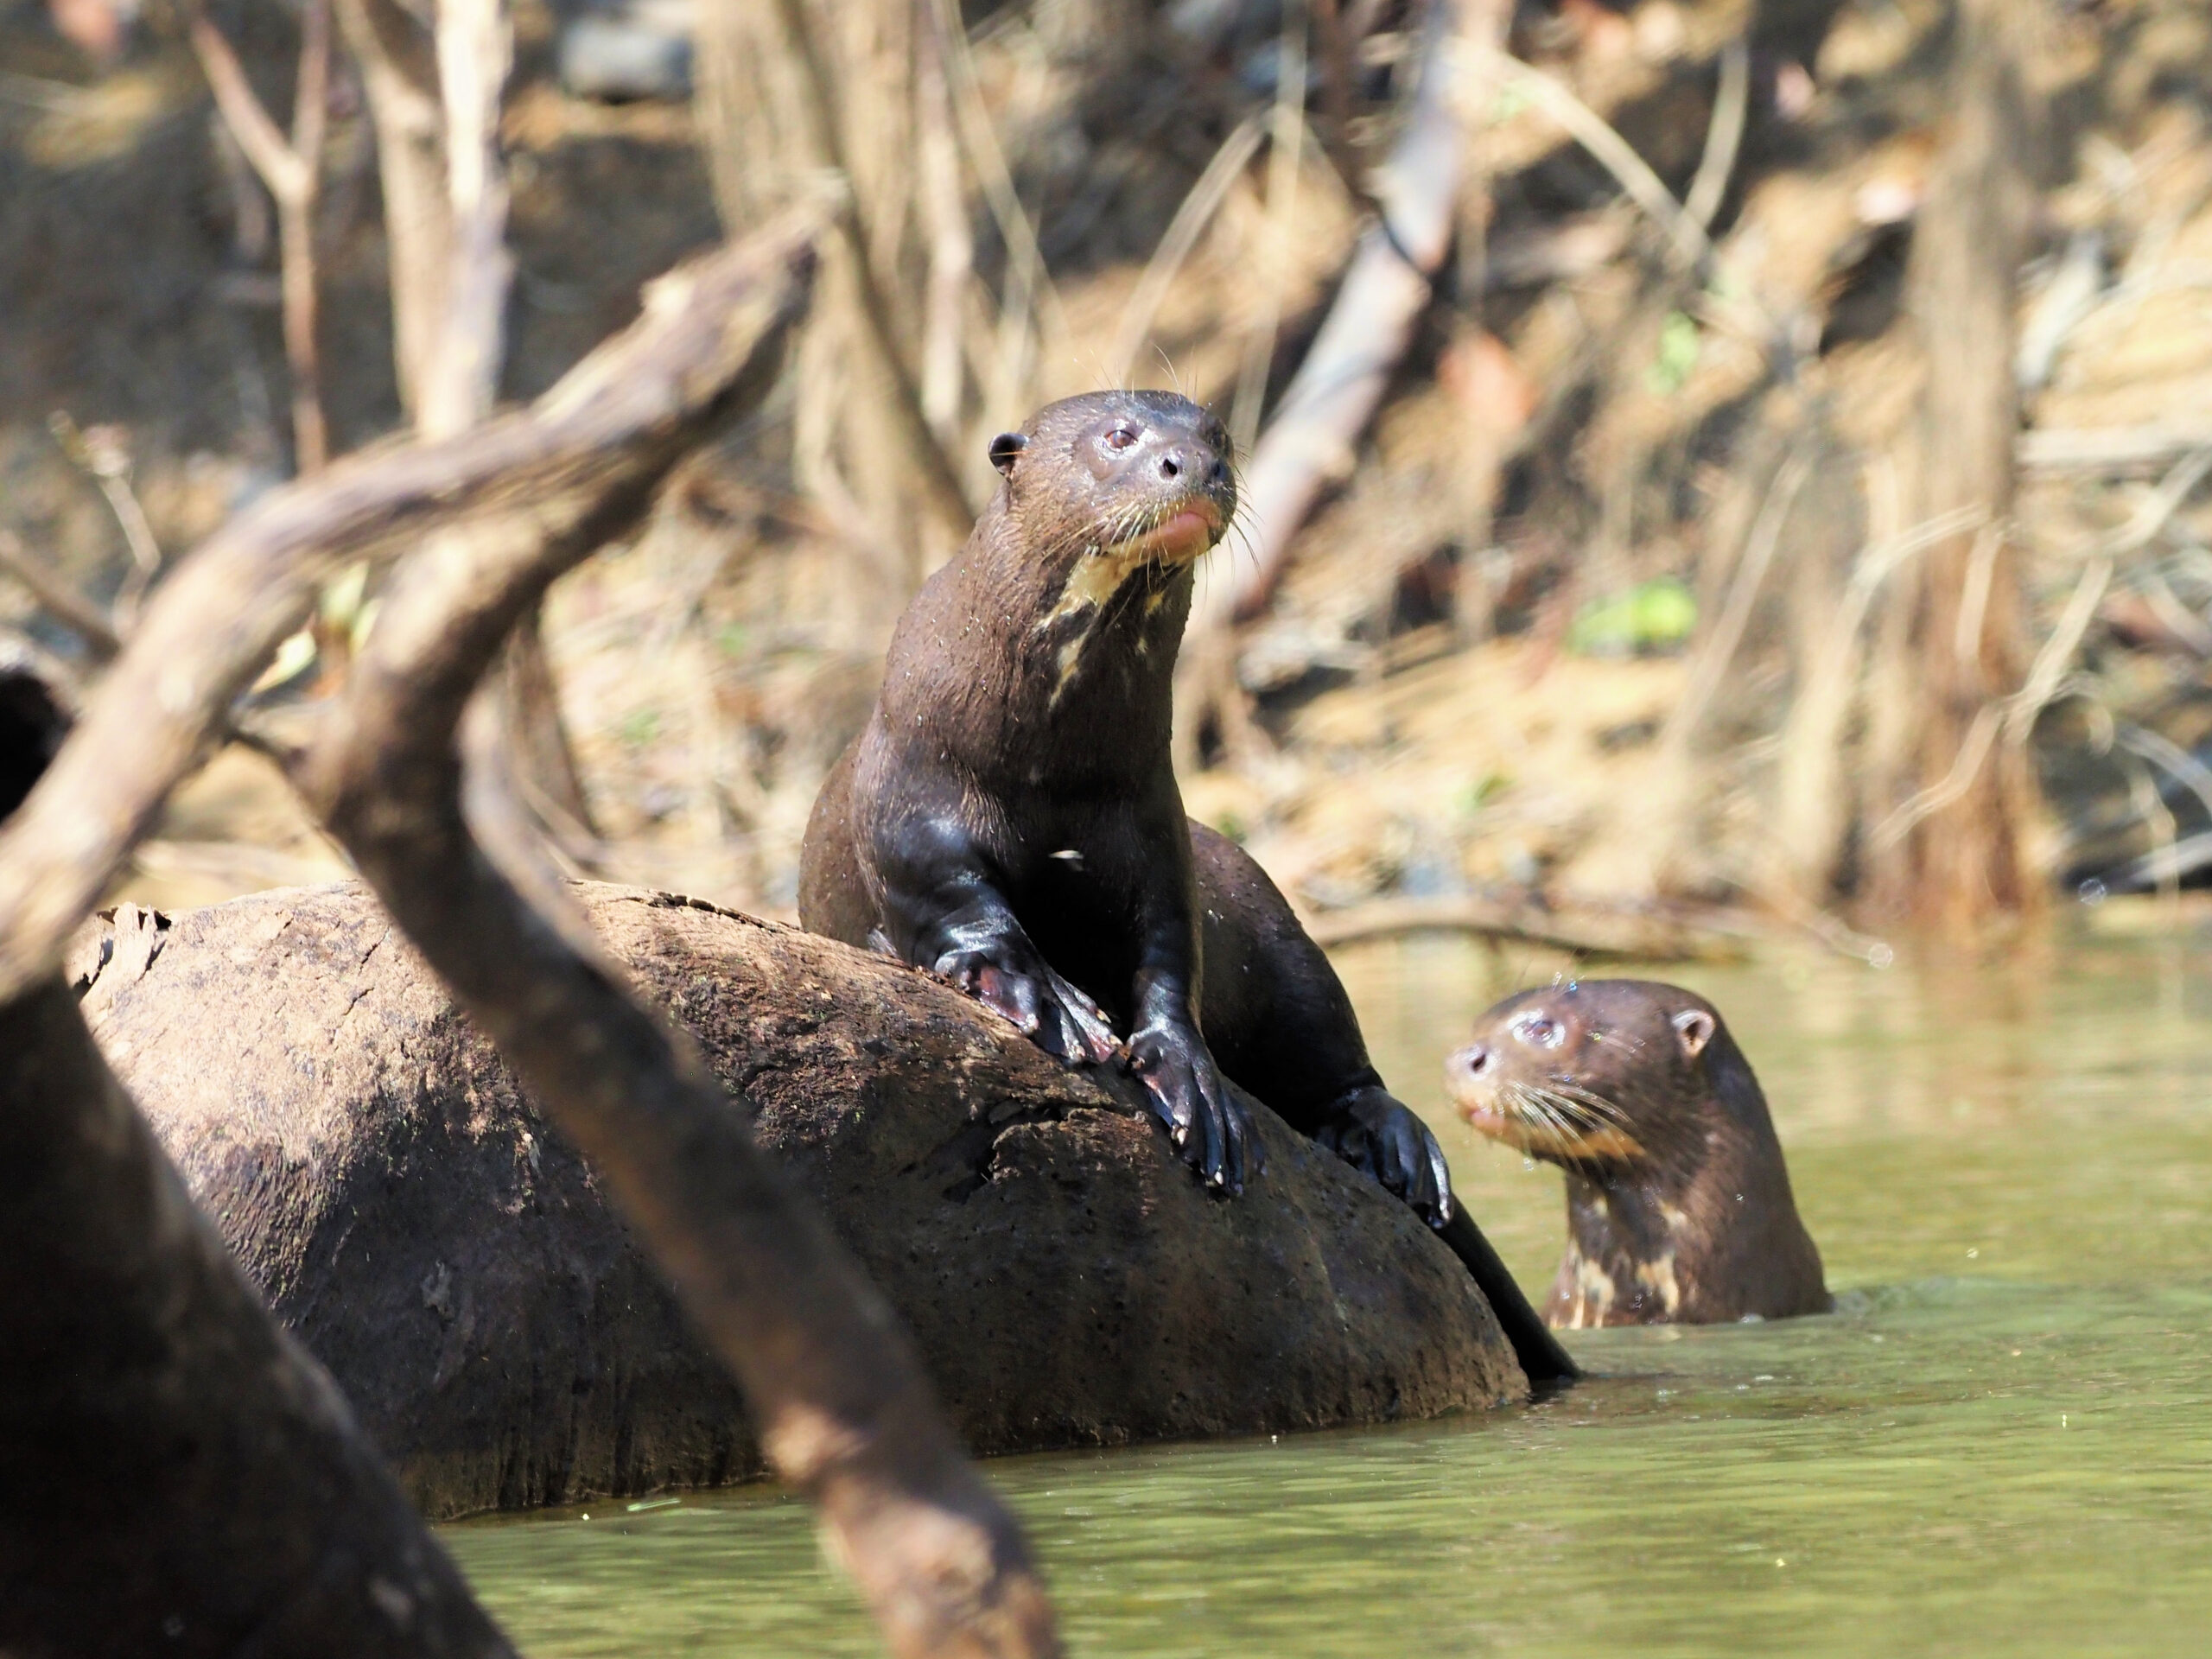 Giant Otters were found on four occasions with the group enjoying some amazingly close encounters © Chris Collins Sept 2023